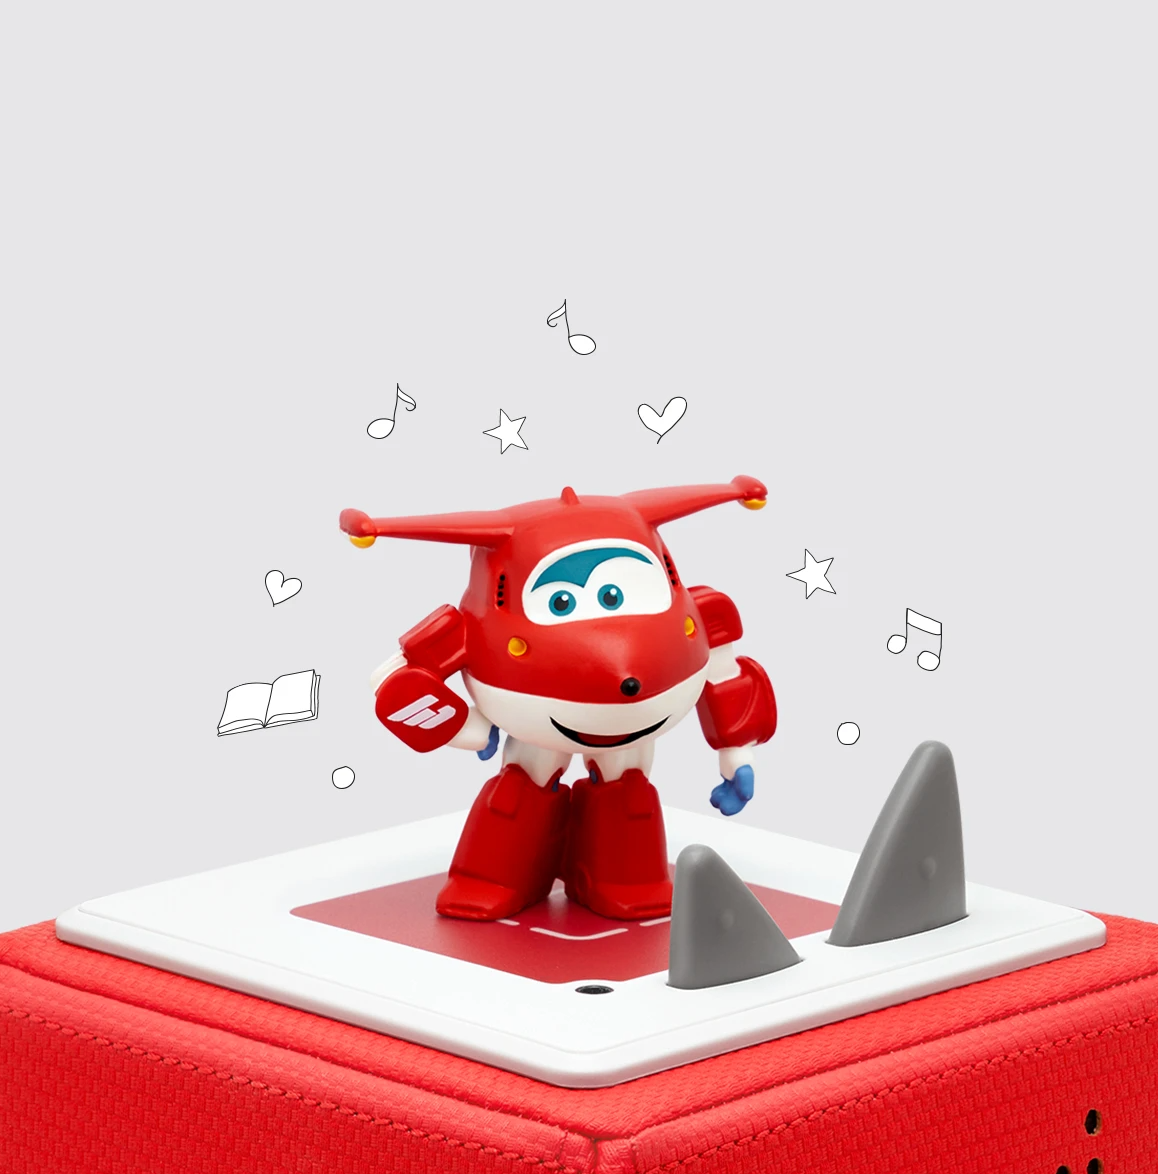 Tonie "Super Wings: A World of Adventure"